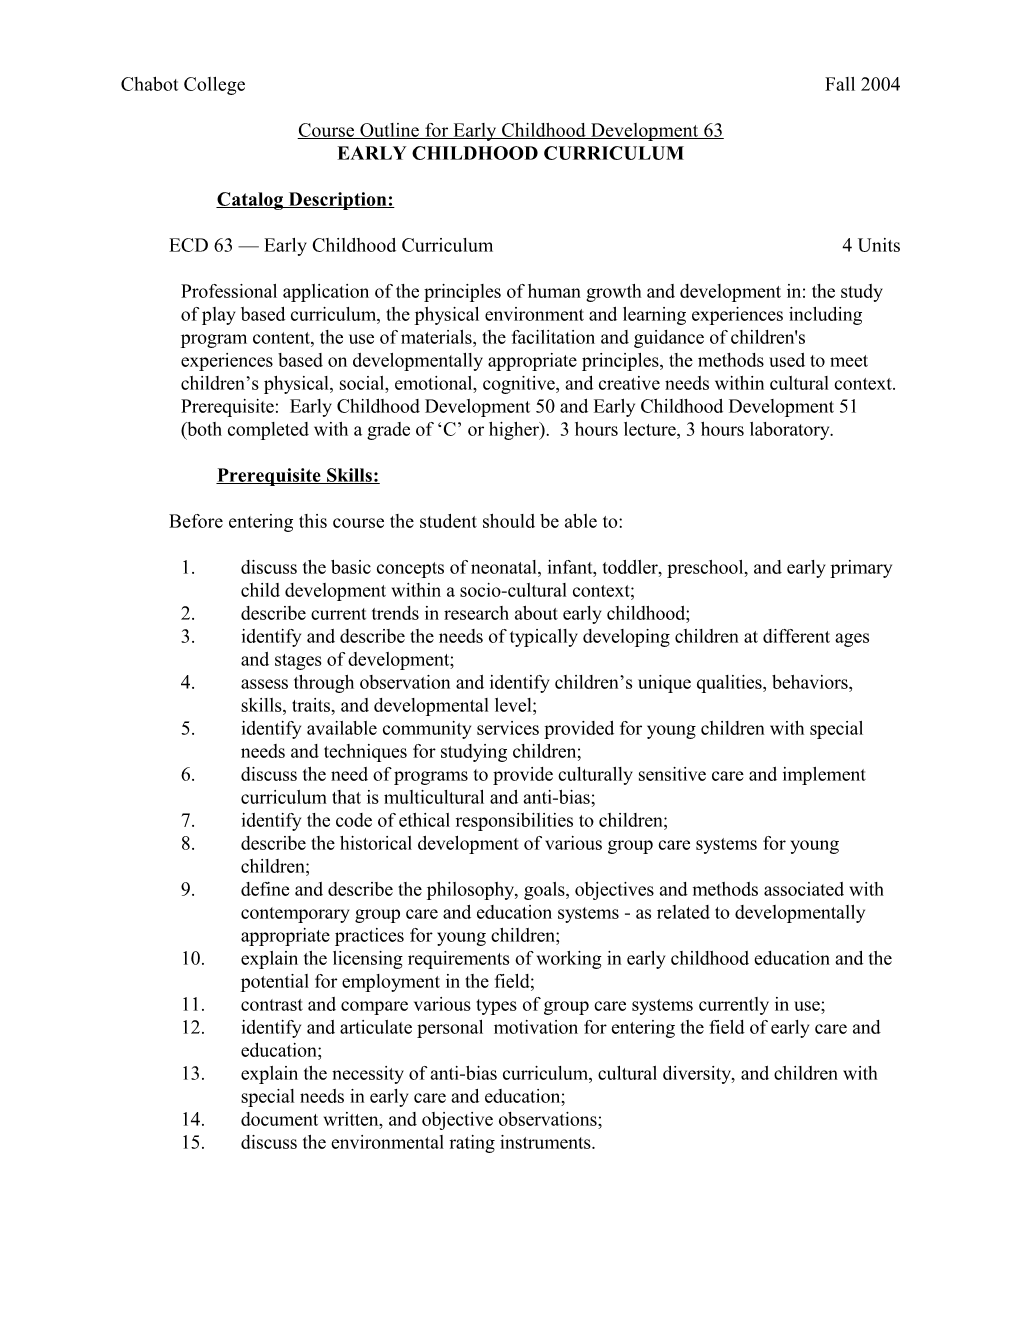 Course Outline for ECD 63, Page 4